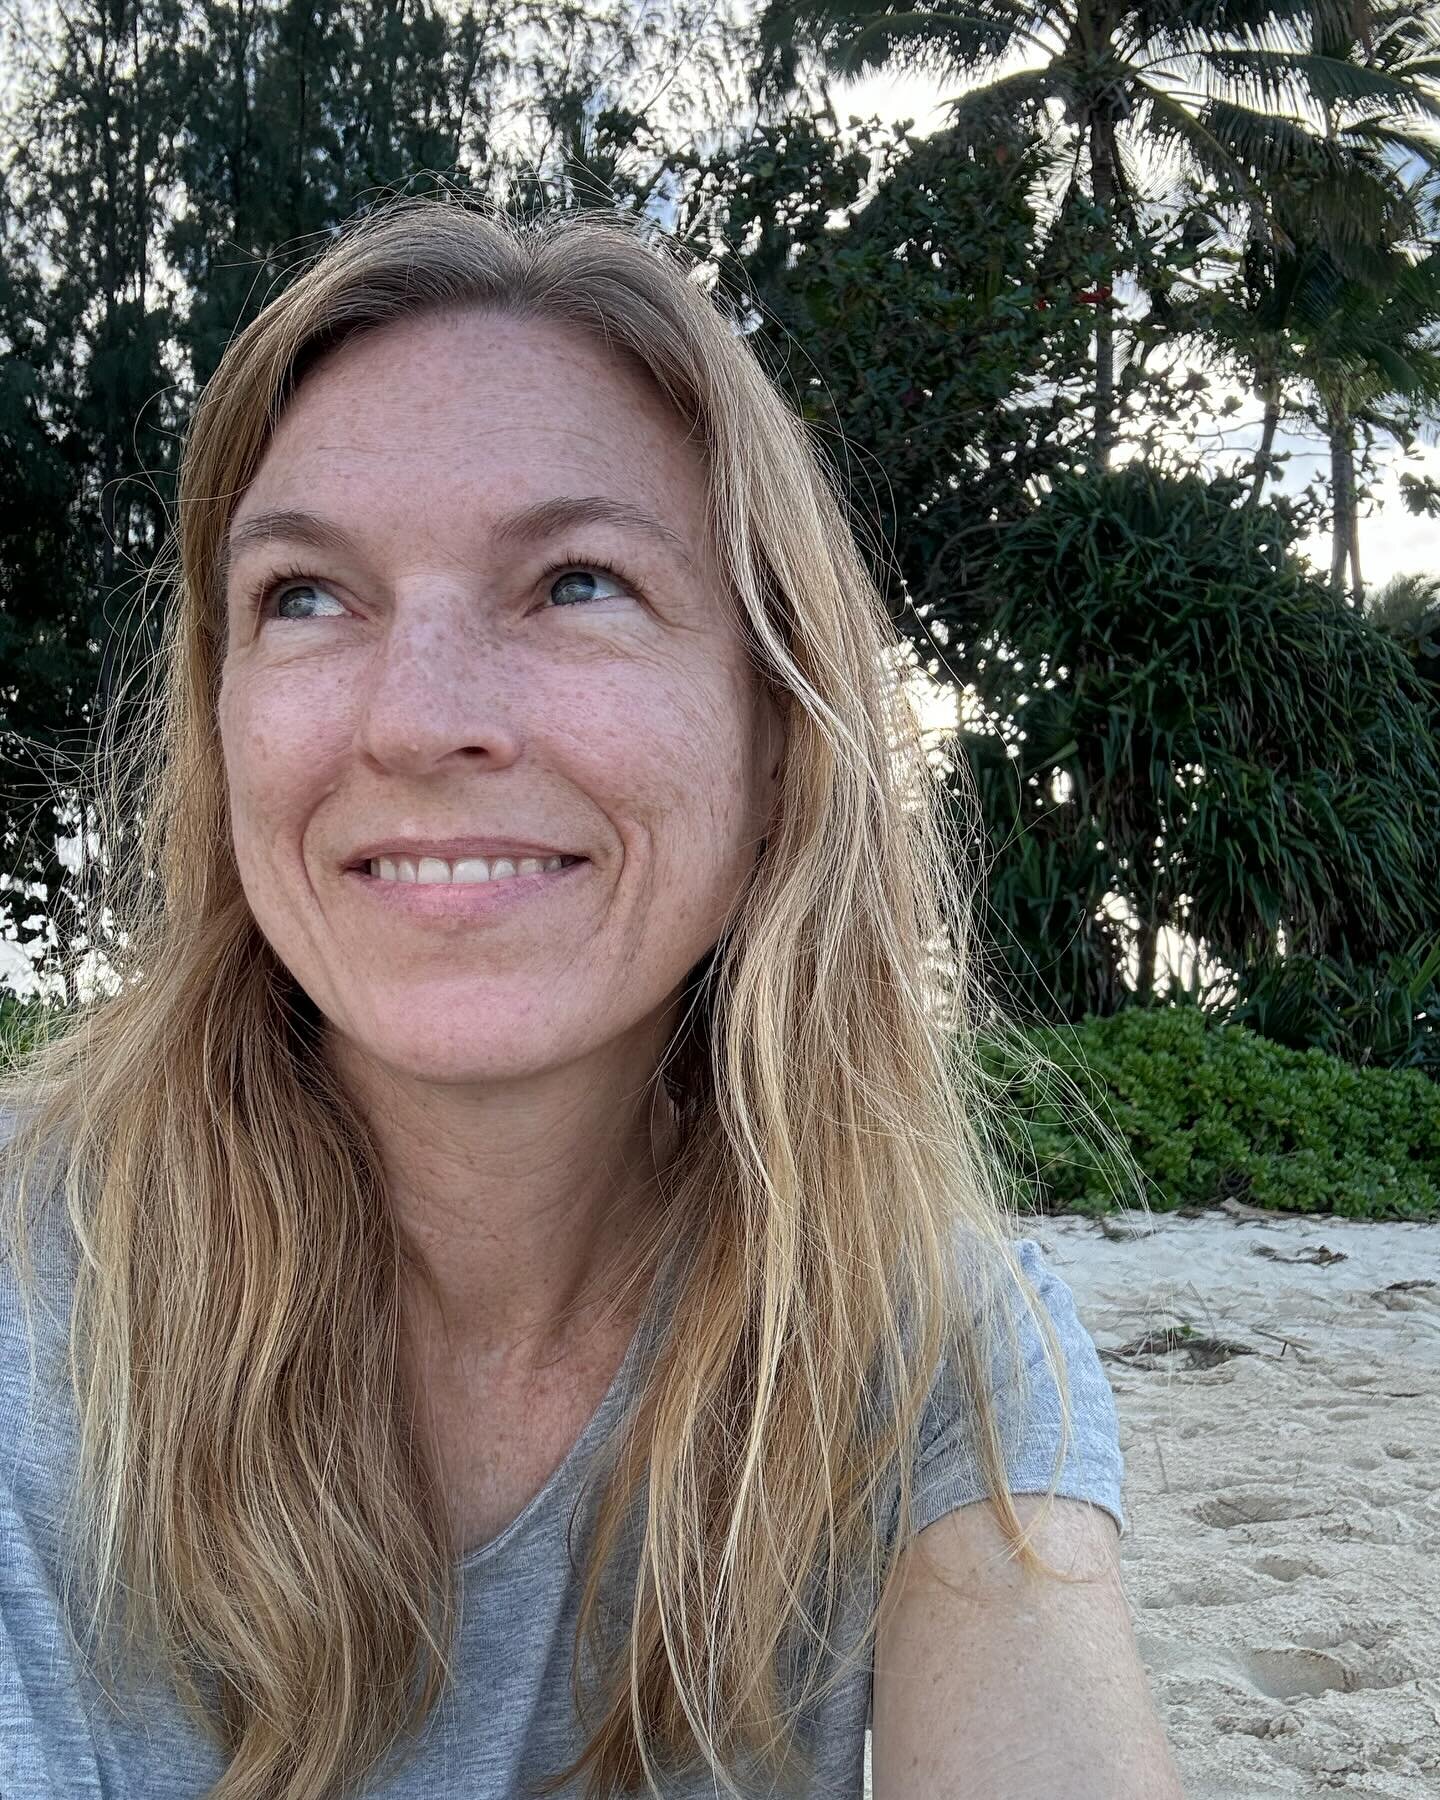 This is 48. This is gratitude for waking up once again, for being loved, for feeling free of chronic fear and full of purpose, for hard-won close connection with my spouse, for being okay with all of my flaws, for knowing I have endless grace-filled 